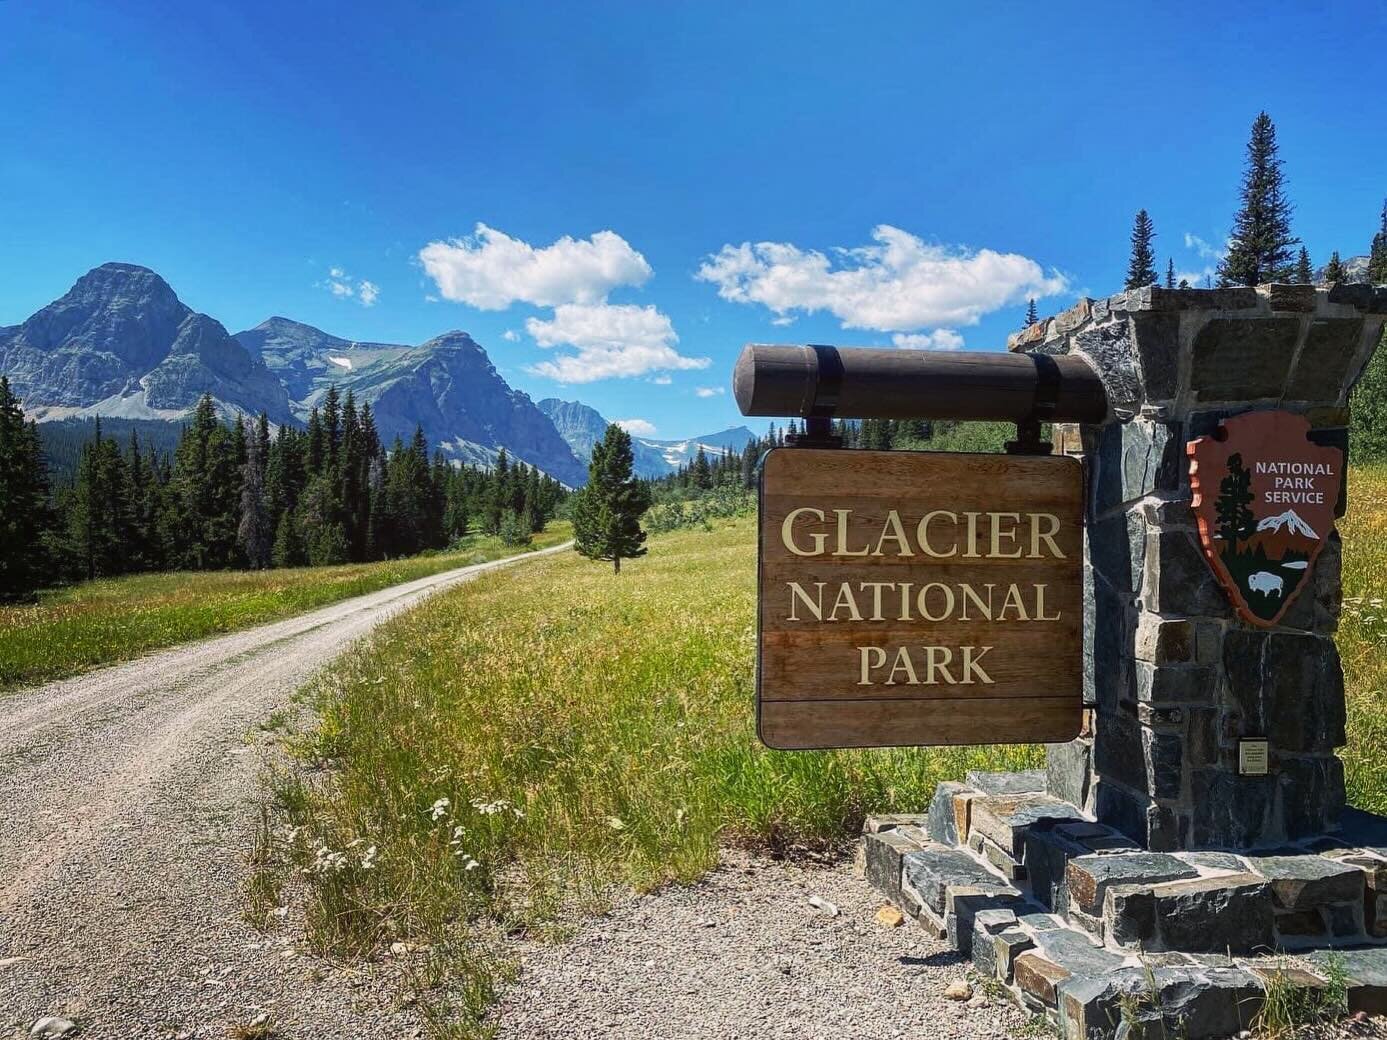 Vehicle reservations - it&rsquo;s that time of year again! Here&rsquo;s the lowdown on visiting #glaciernps this summer with specific info for the east side. 

Overview:
* You will need a vehicle reservation for the west entrance to the #goingtothesu